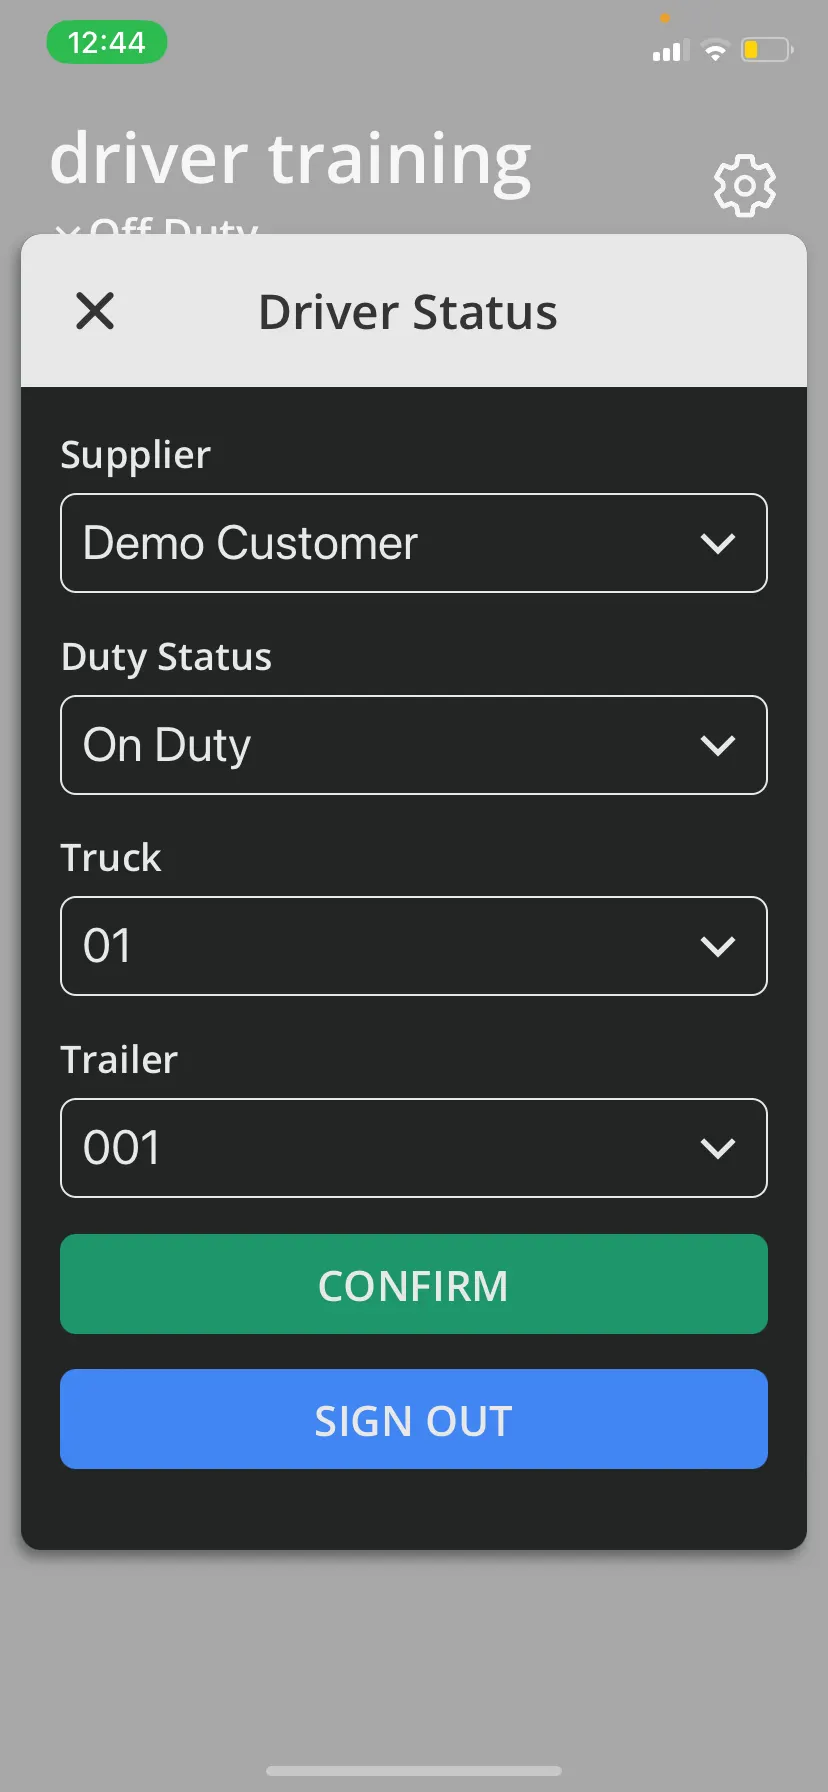 Choose your Supplier and Duty Status. Enter your truck and trailer if needed.  Select Confirm.